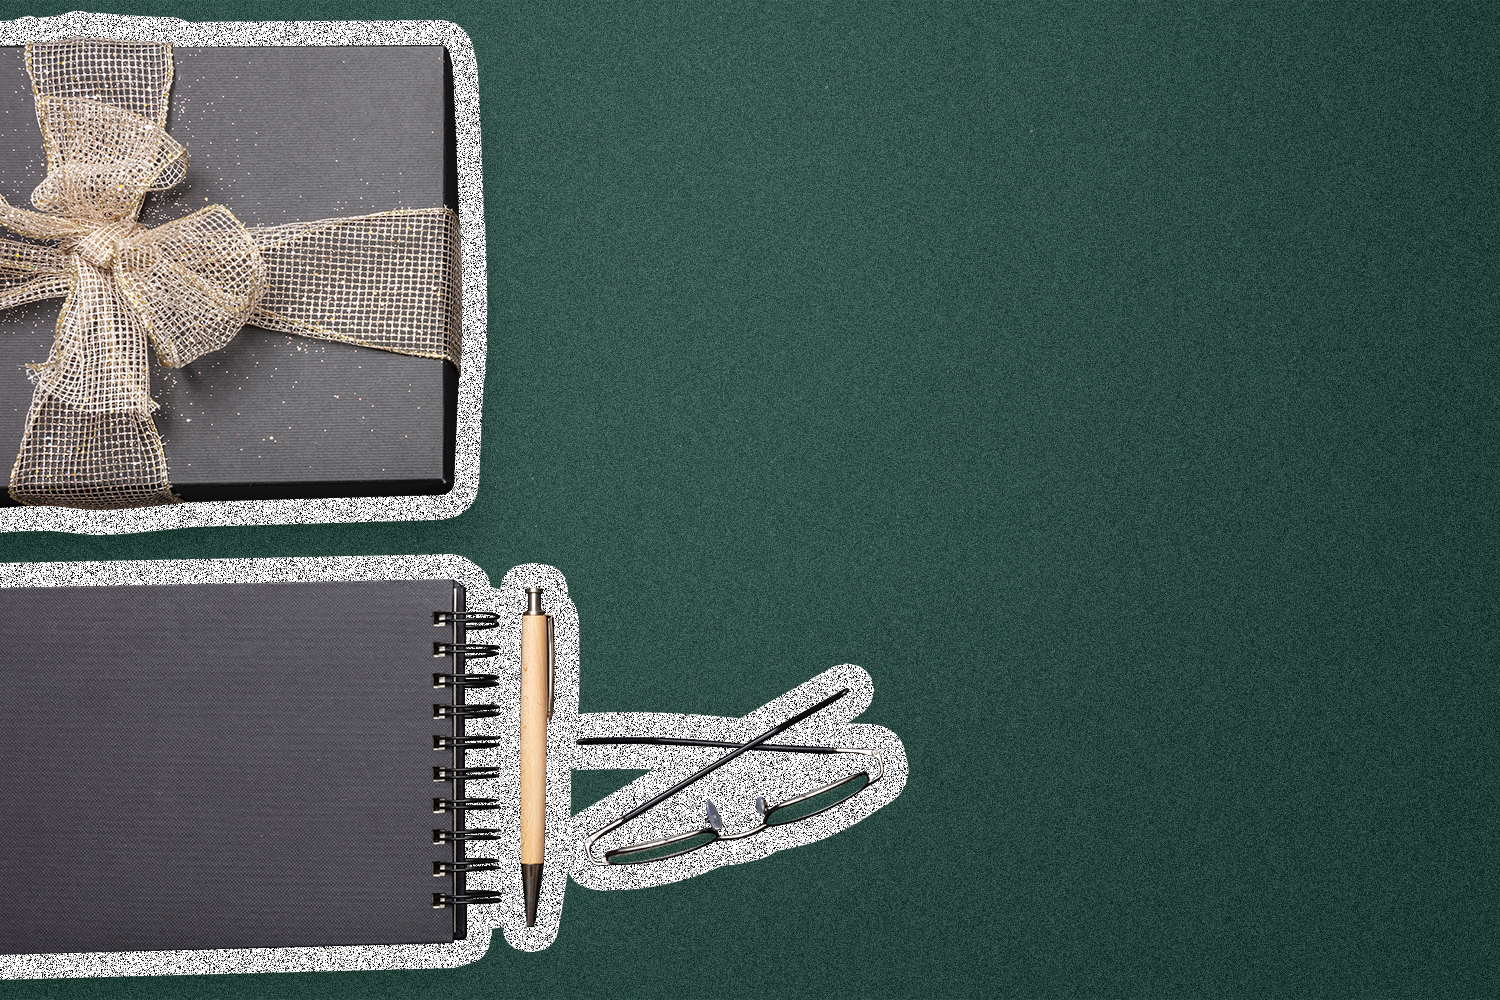 A notebook, pen, gift, and glasses against a dark green background